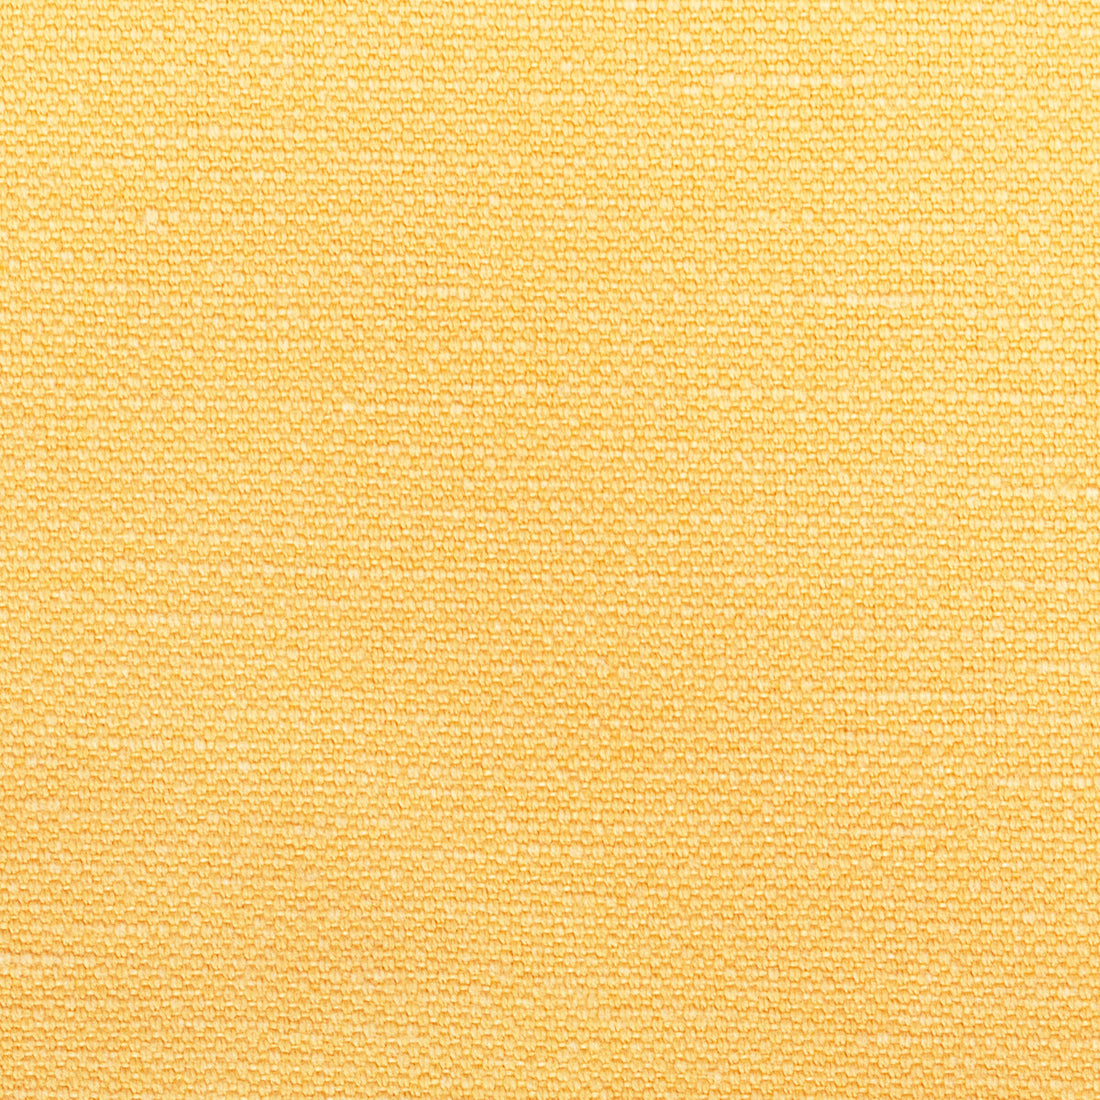 Carson fabric in butter color - pattern 36282.14.0 - by Kravet Basics